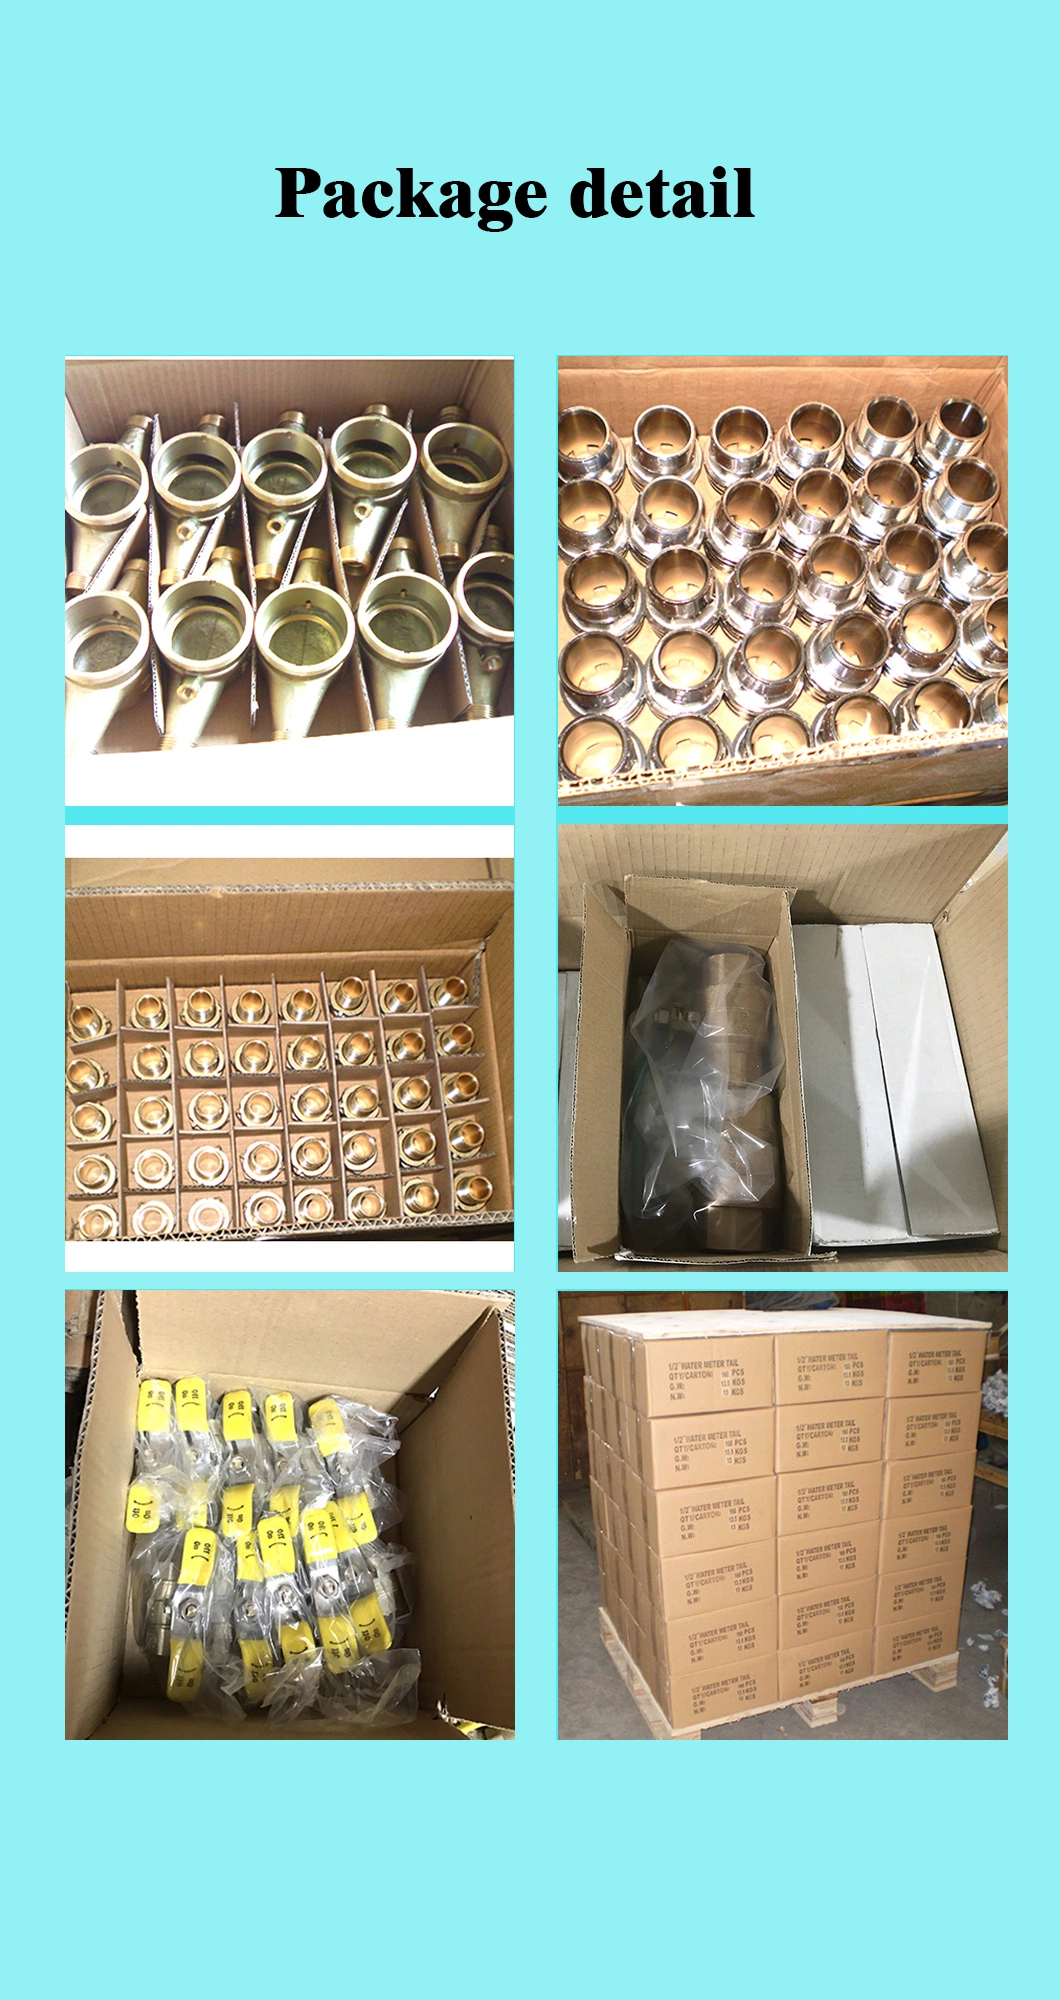 C89833 Lead Free Bronze Female Thread to Compression Coupling Nuts